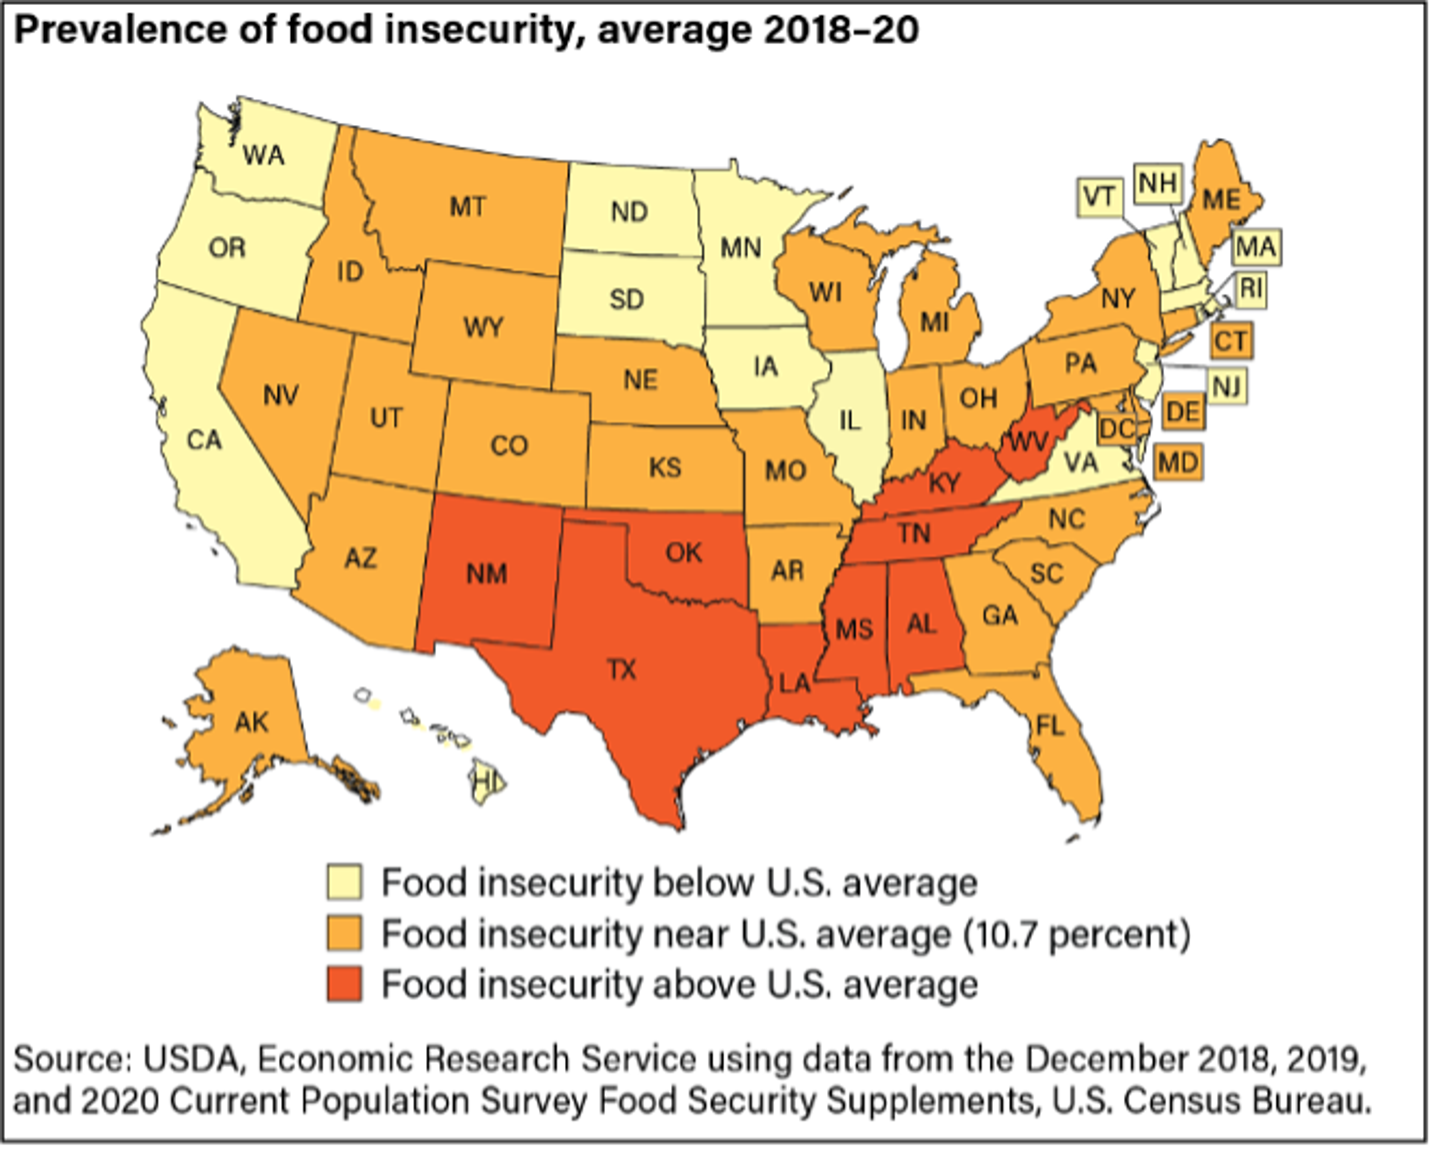 United states showing food insecurity at its highest in state: NM, TX, OK, LA, MS, AL, TN, KY, WV